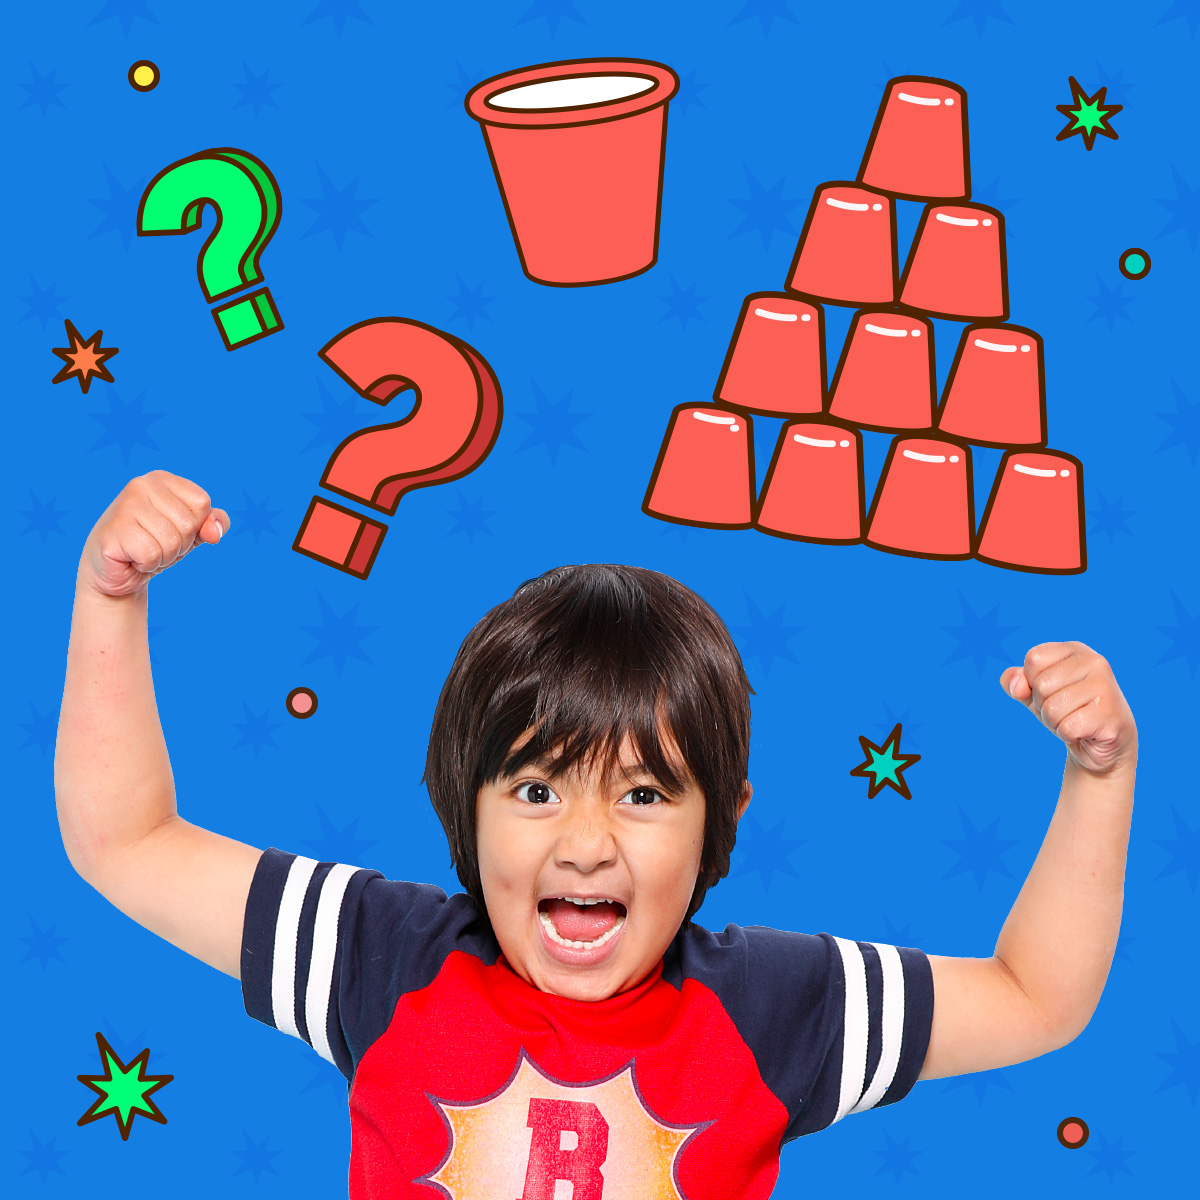 Ryan's Mystery Playdate Cup Stacking Challenge